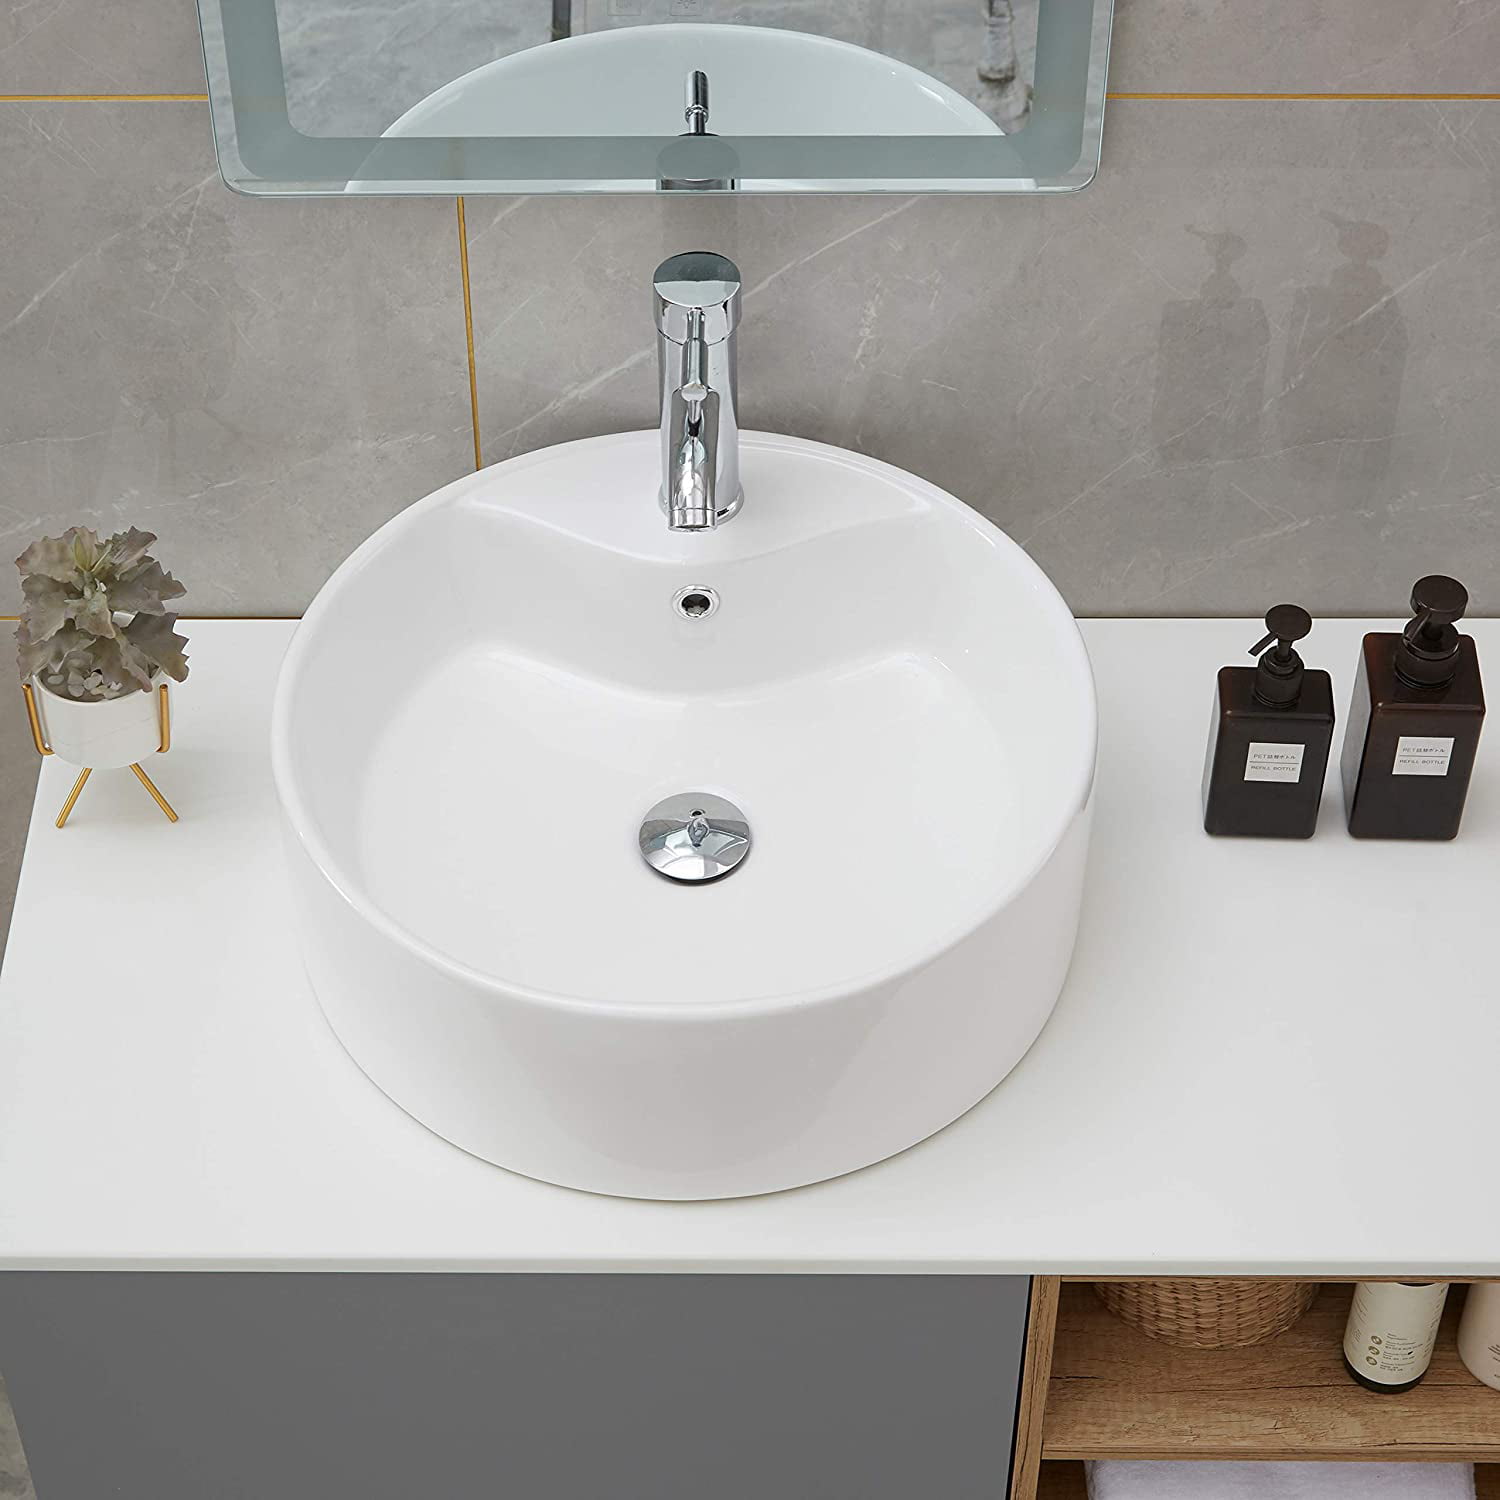 Bathroom Vessel Sink And Pop Up Drain, Ceramic Round Kitchen Sink And Drainer Combo